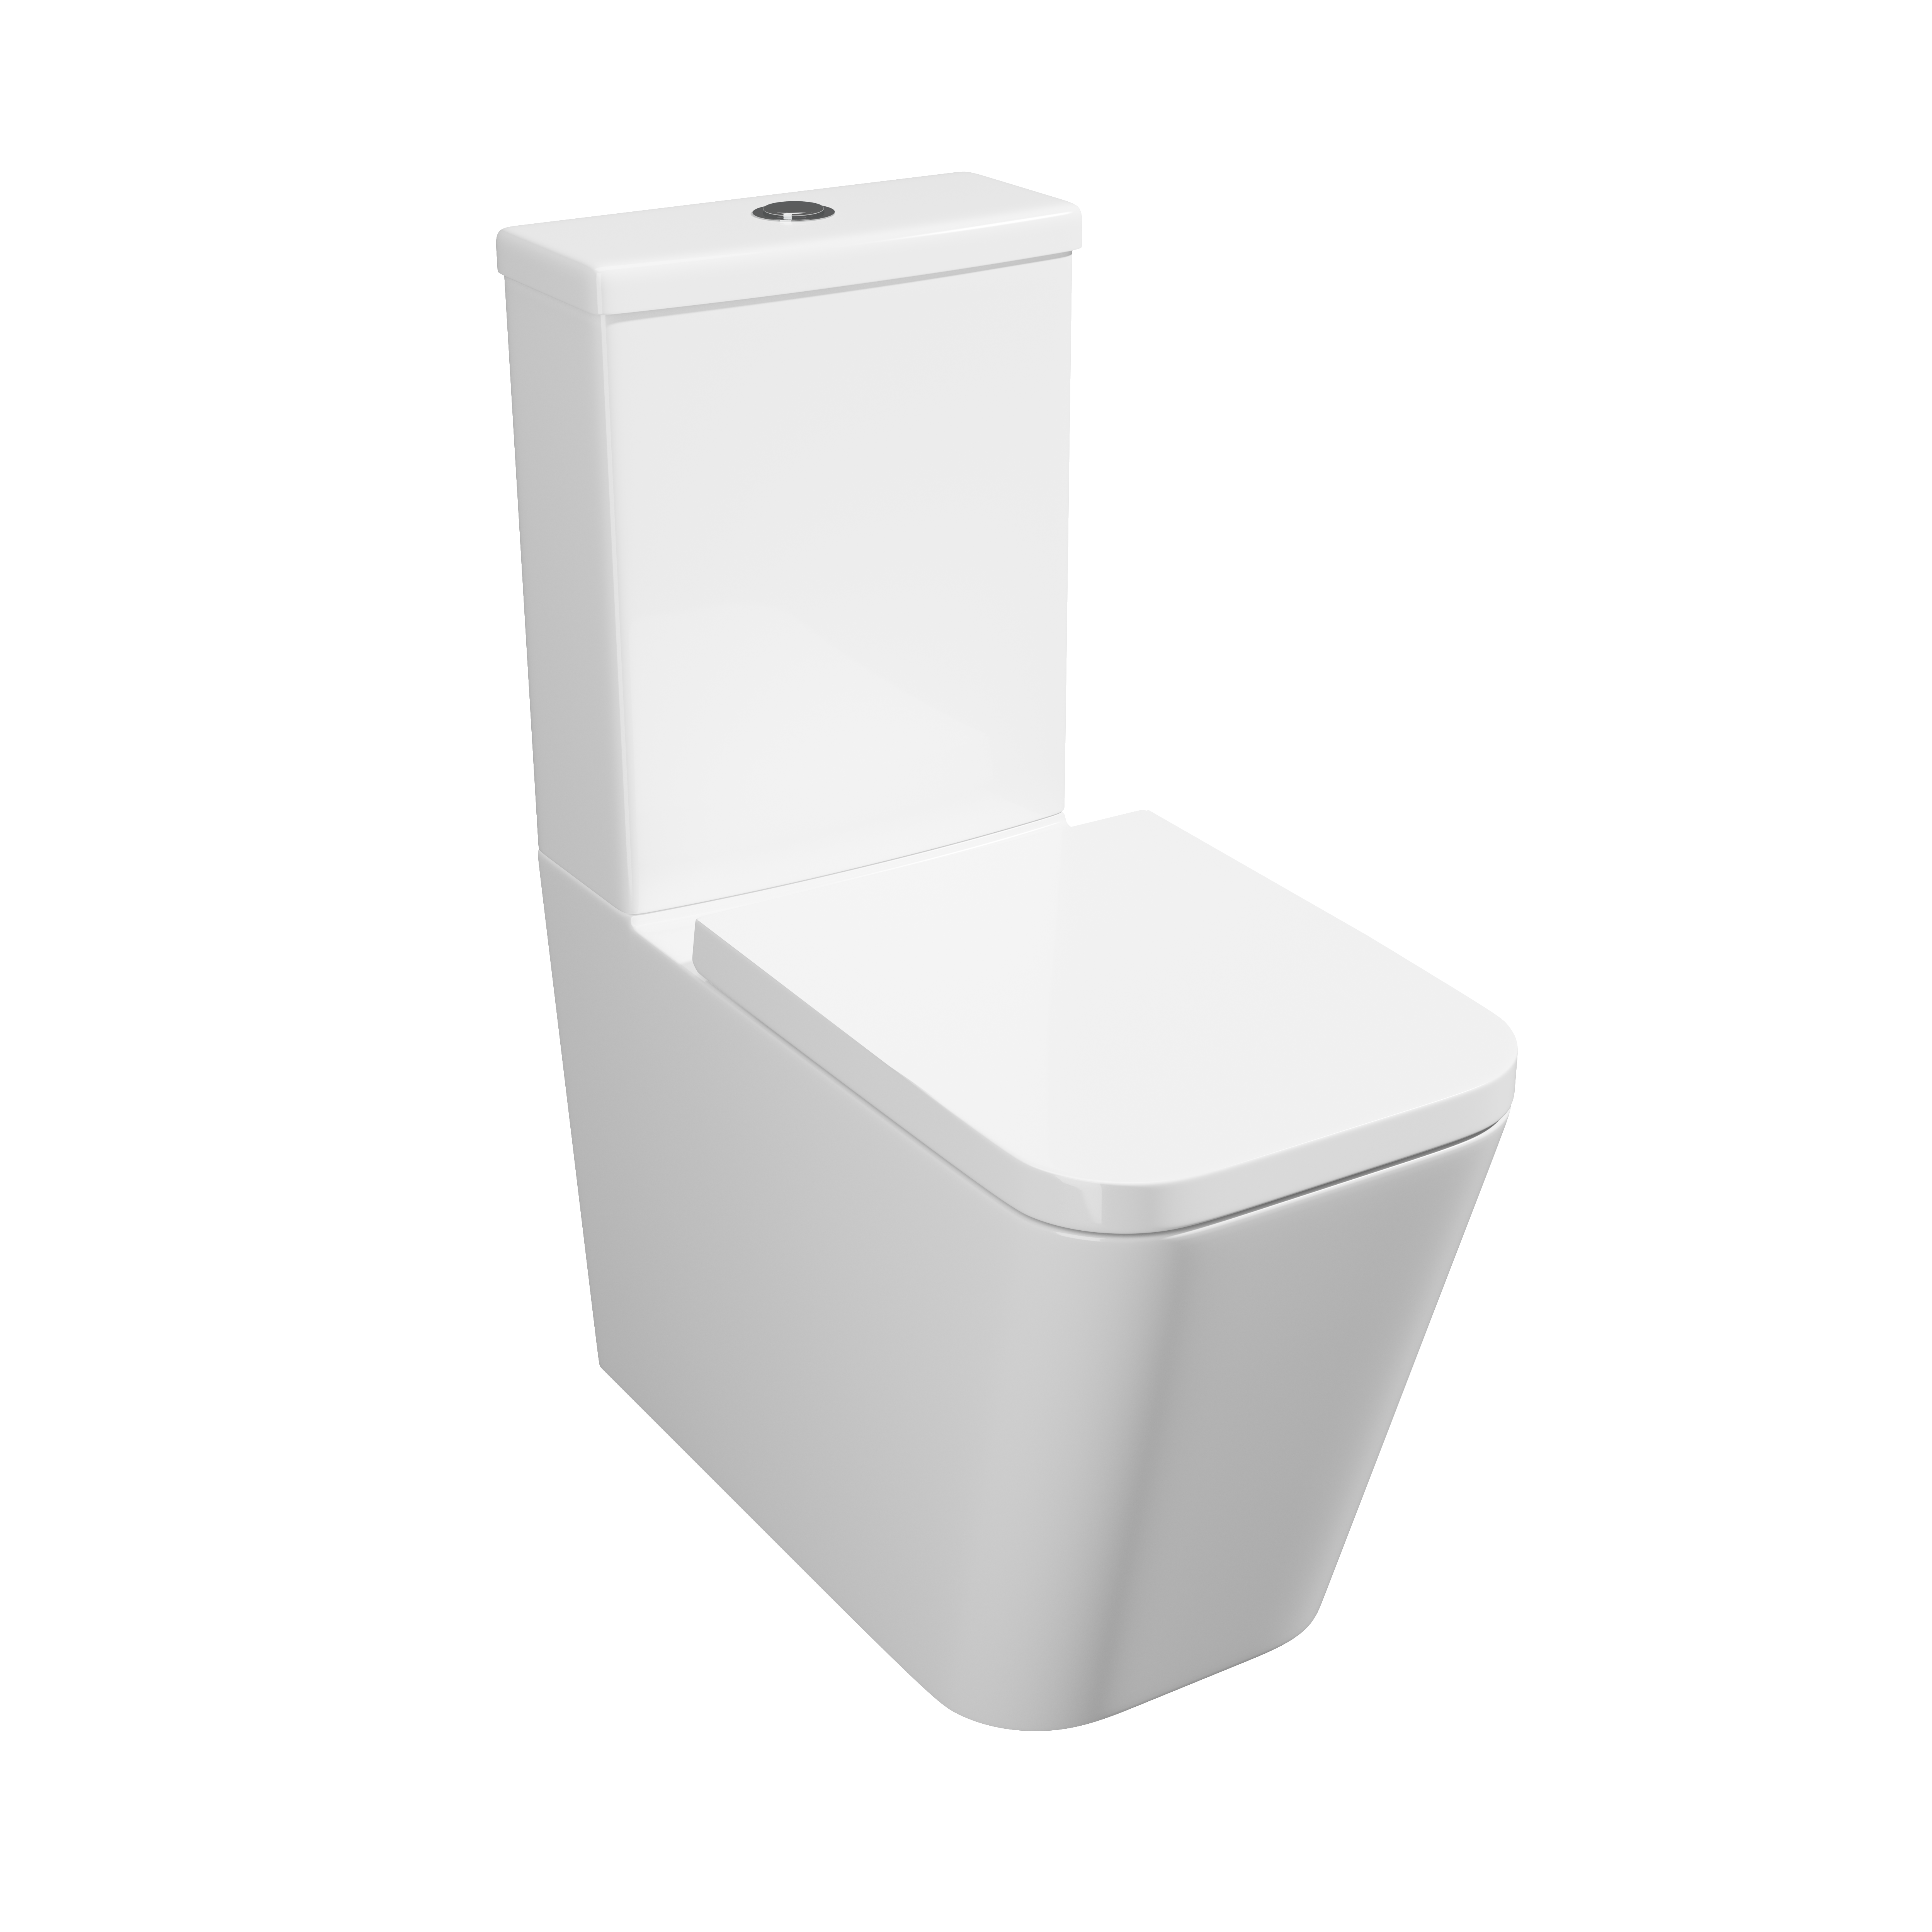 Kartell UK Genoa Square Close to Wall Toilet Set with Premium Soft Close Seat